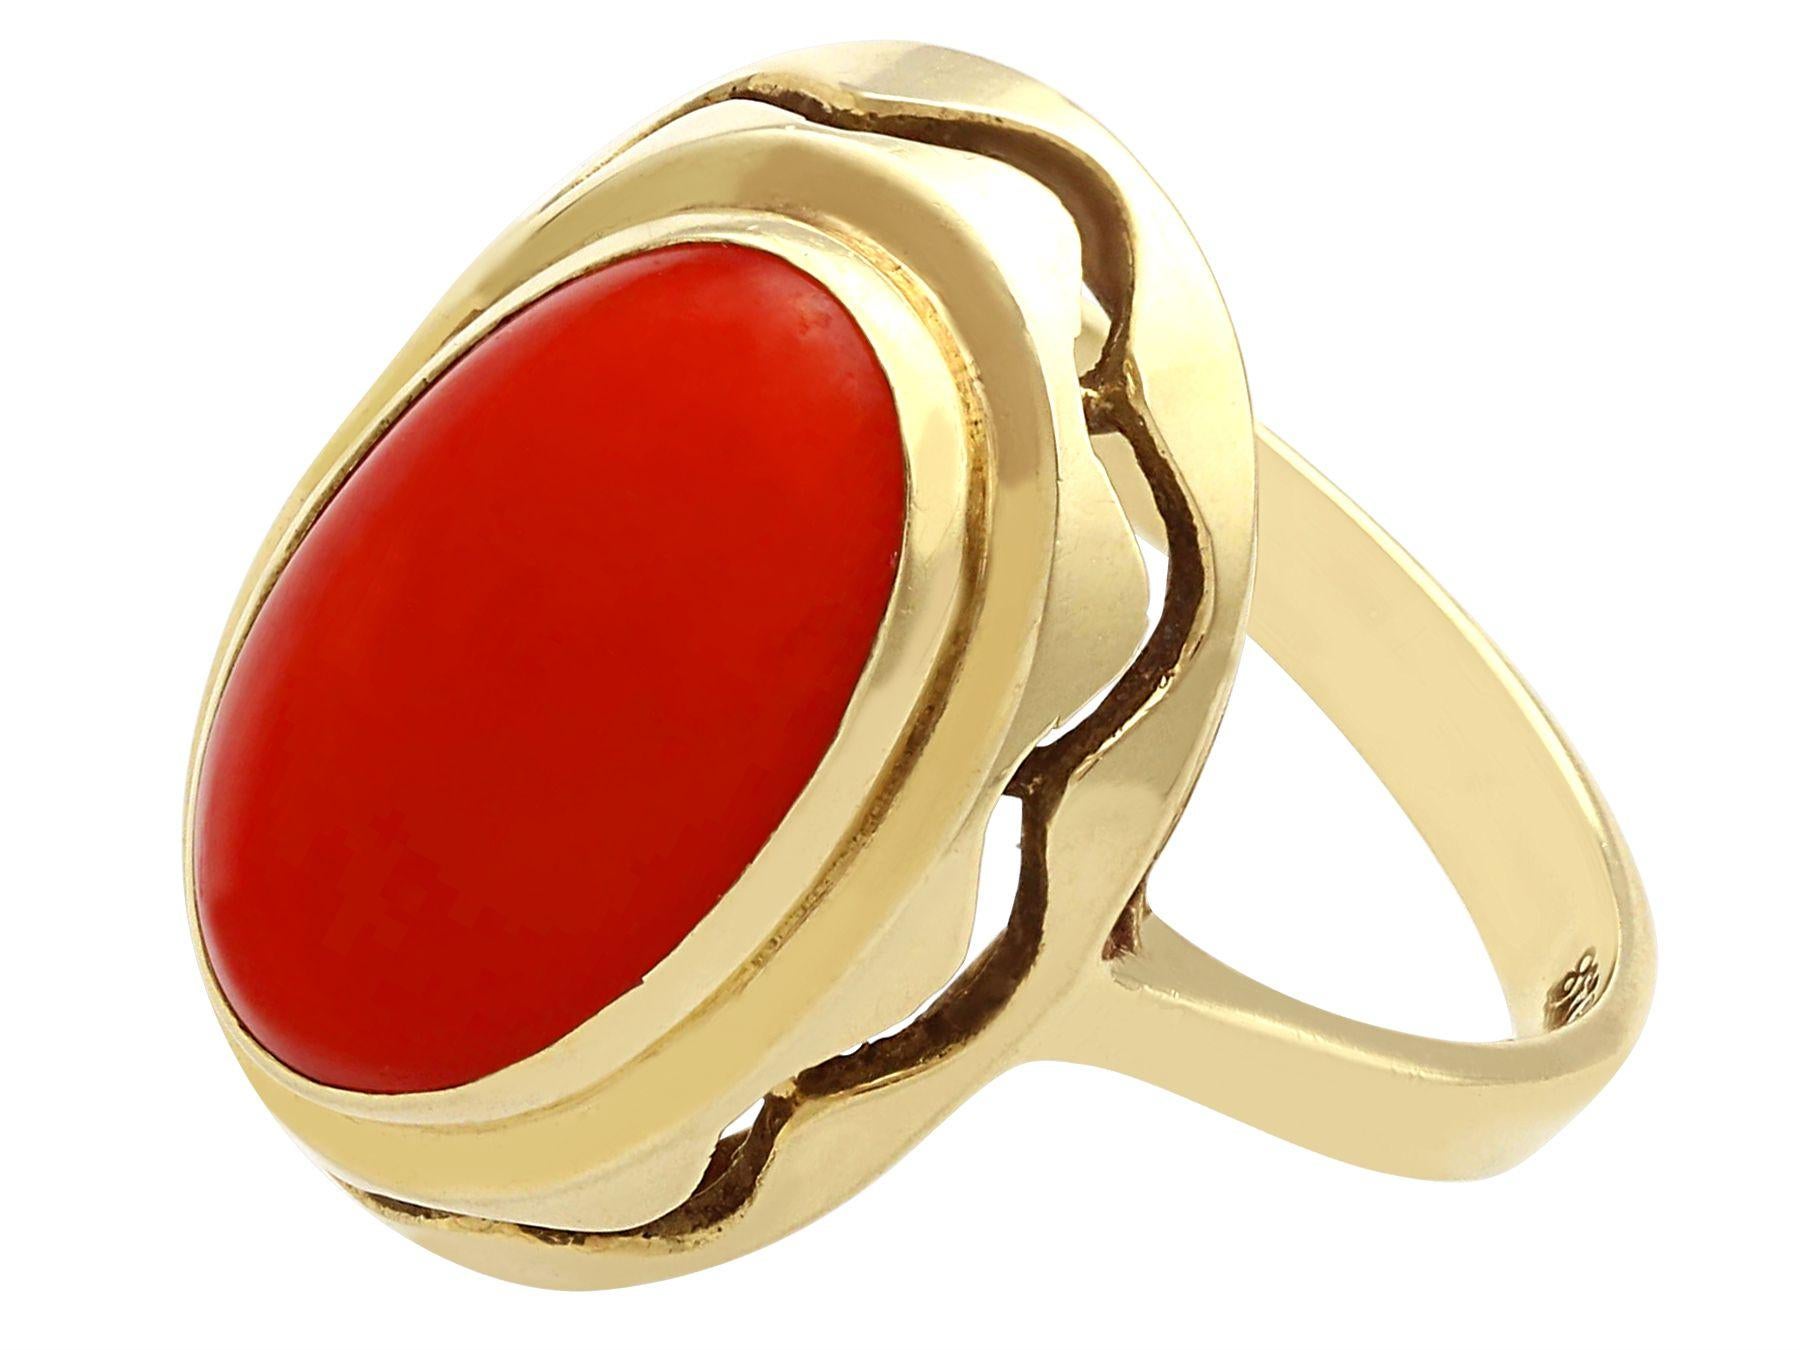 1940s Vintage Coral and Yellow Gold Cocktail Ring In Excellent Condition For Sale In Jesmond, Newcastle Upon Tyne